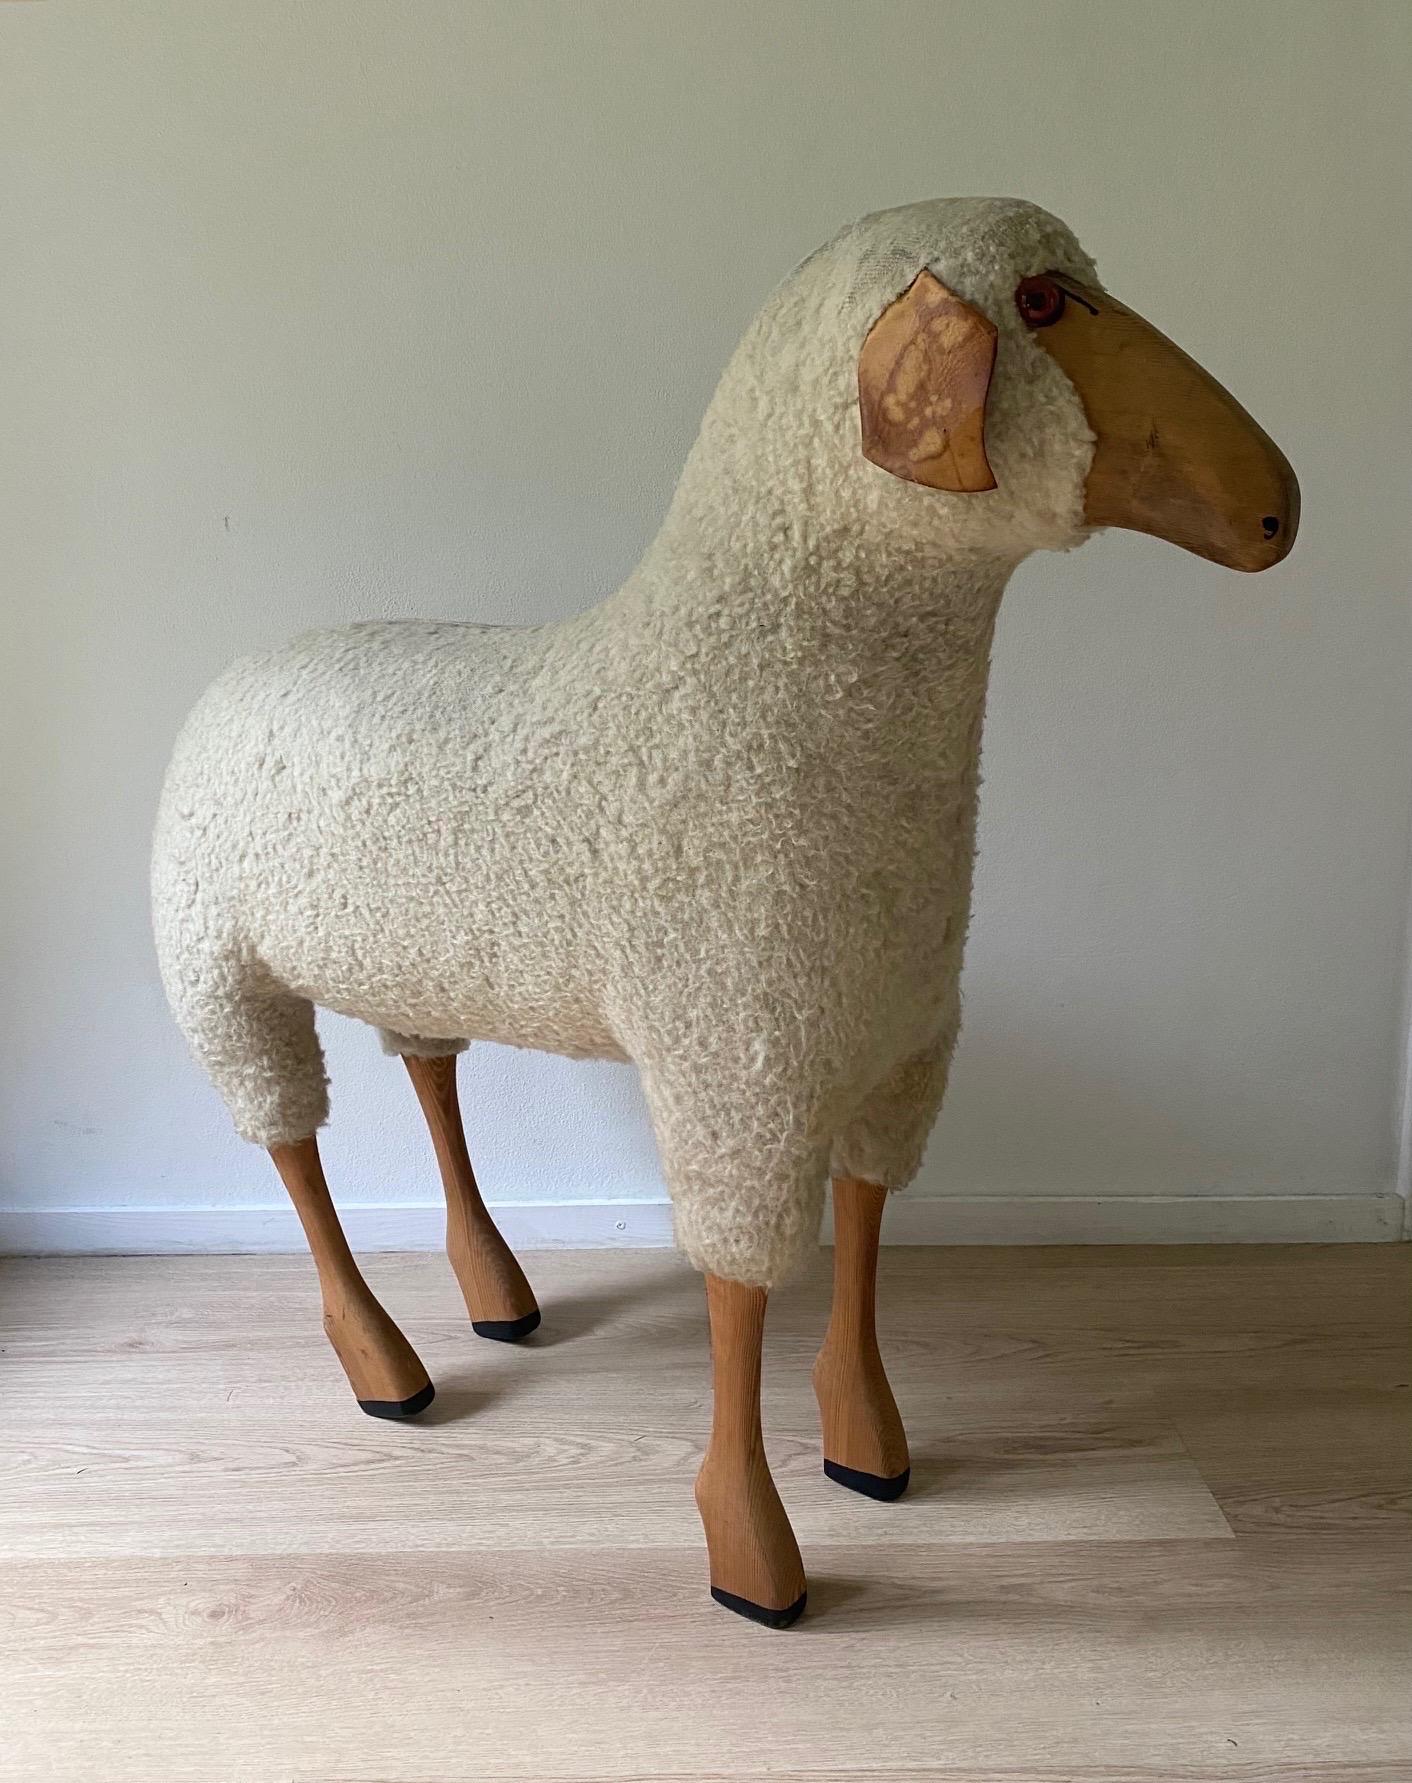 Life-size handcrafted white wool sheep by Hans-Peter Krafft, Germany, ca. the 1960s-1970s. The sheep remains in a good/fair vintage condition with the wool thinned out on some area’s. Also some stains on the leather ears. See Images.